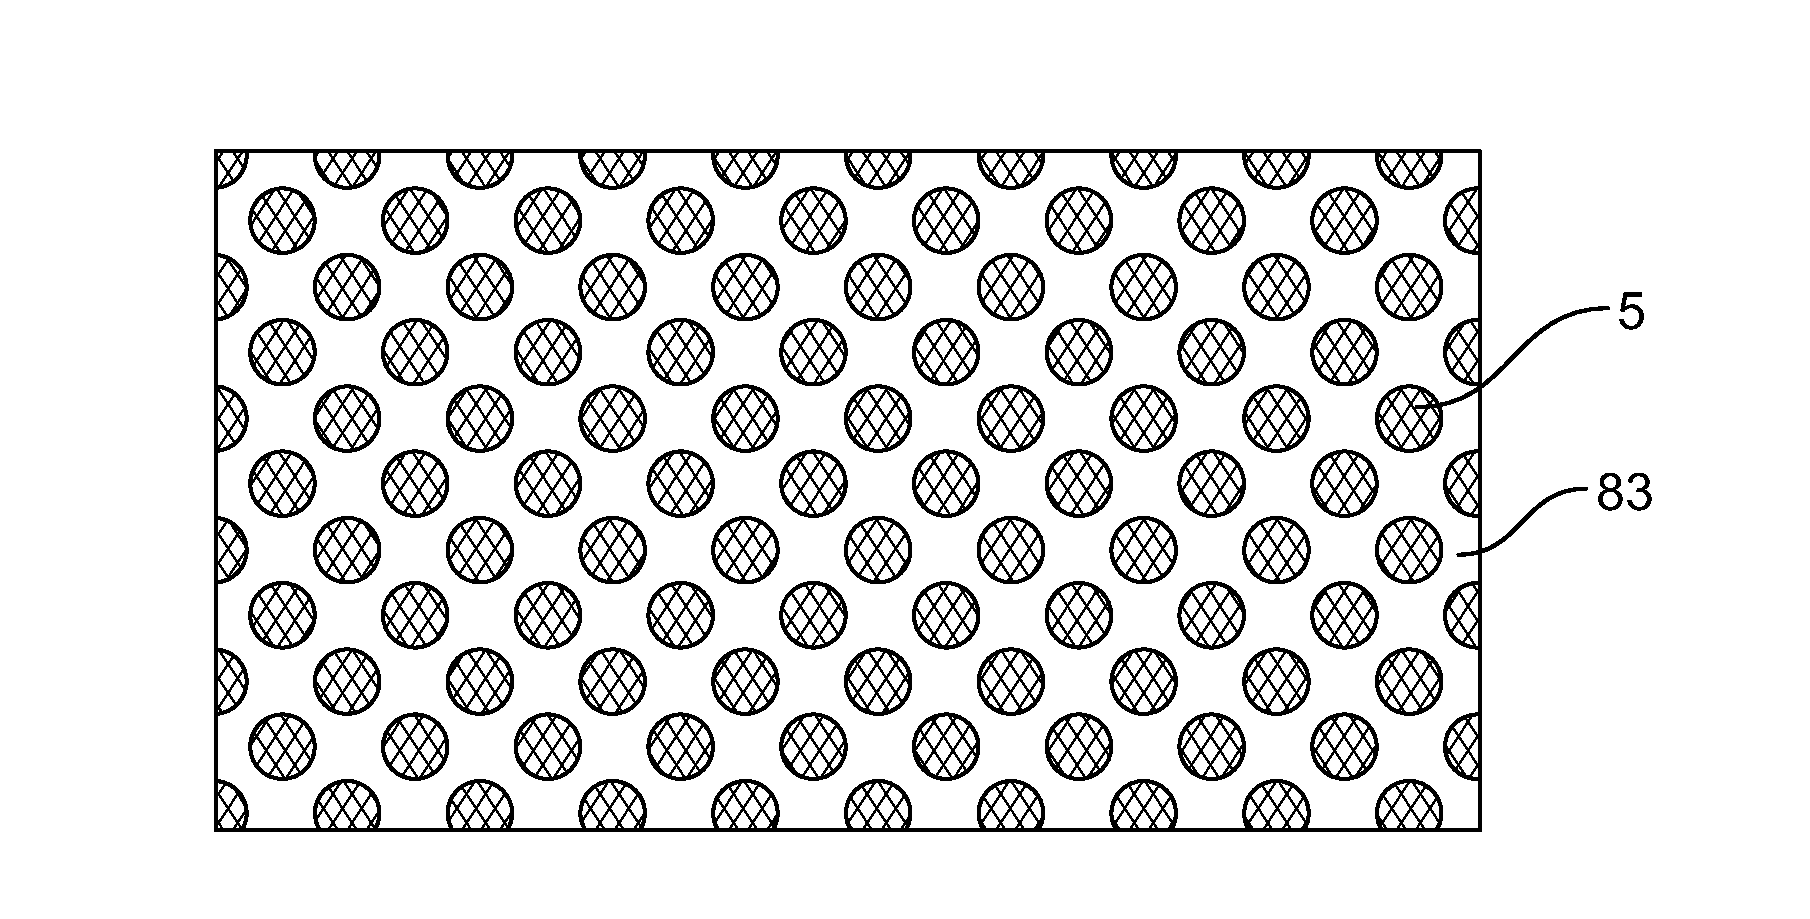 One-Way Graphics Materials and Methods